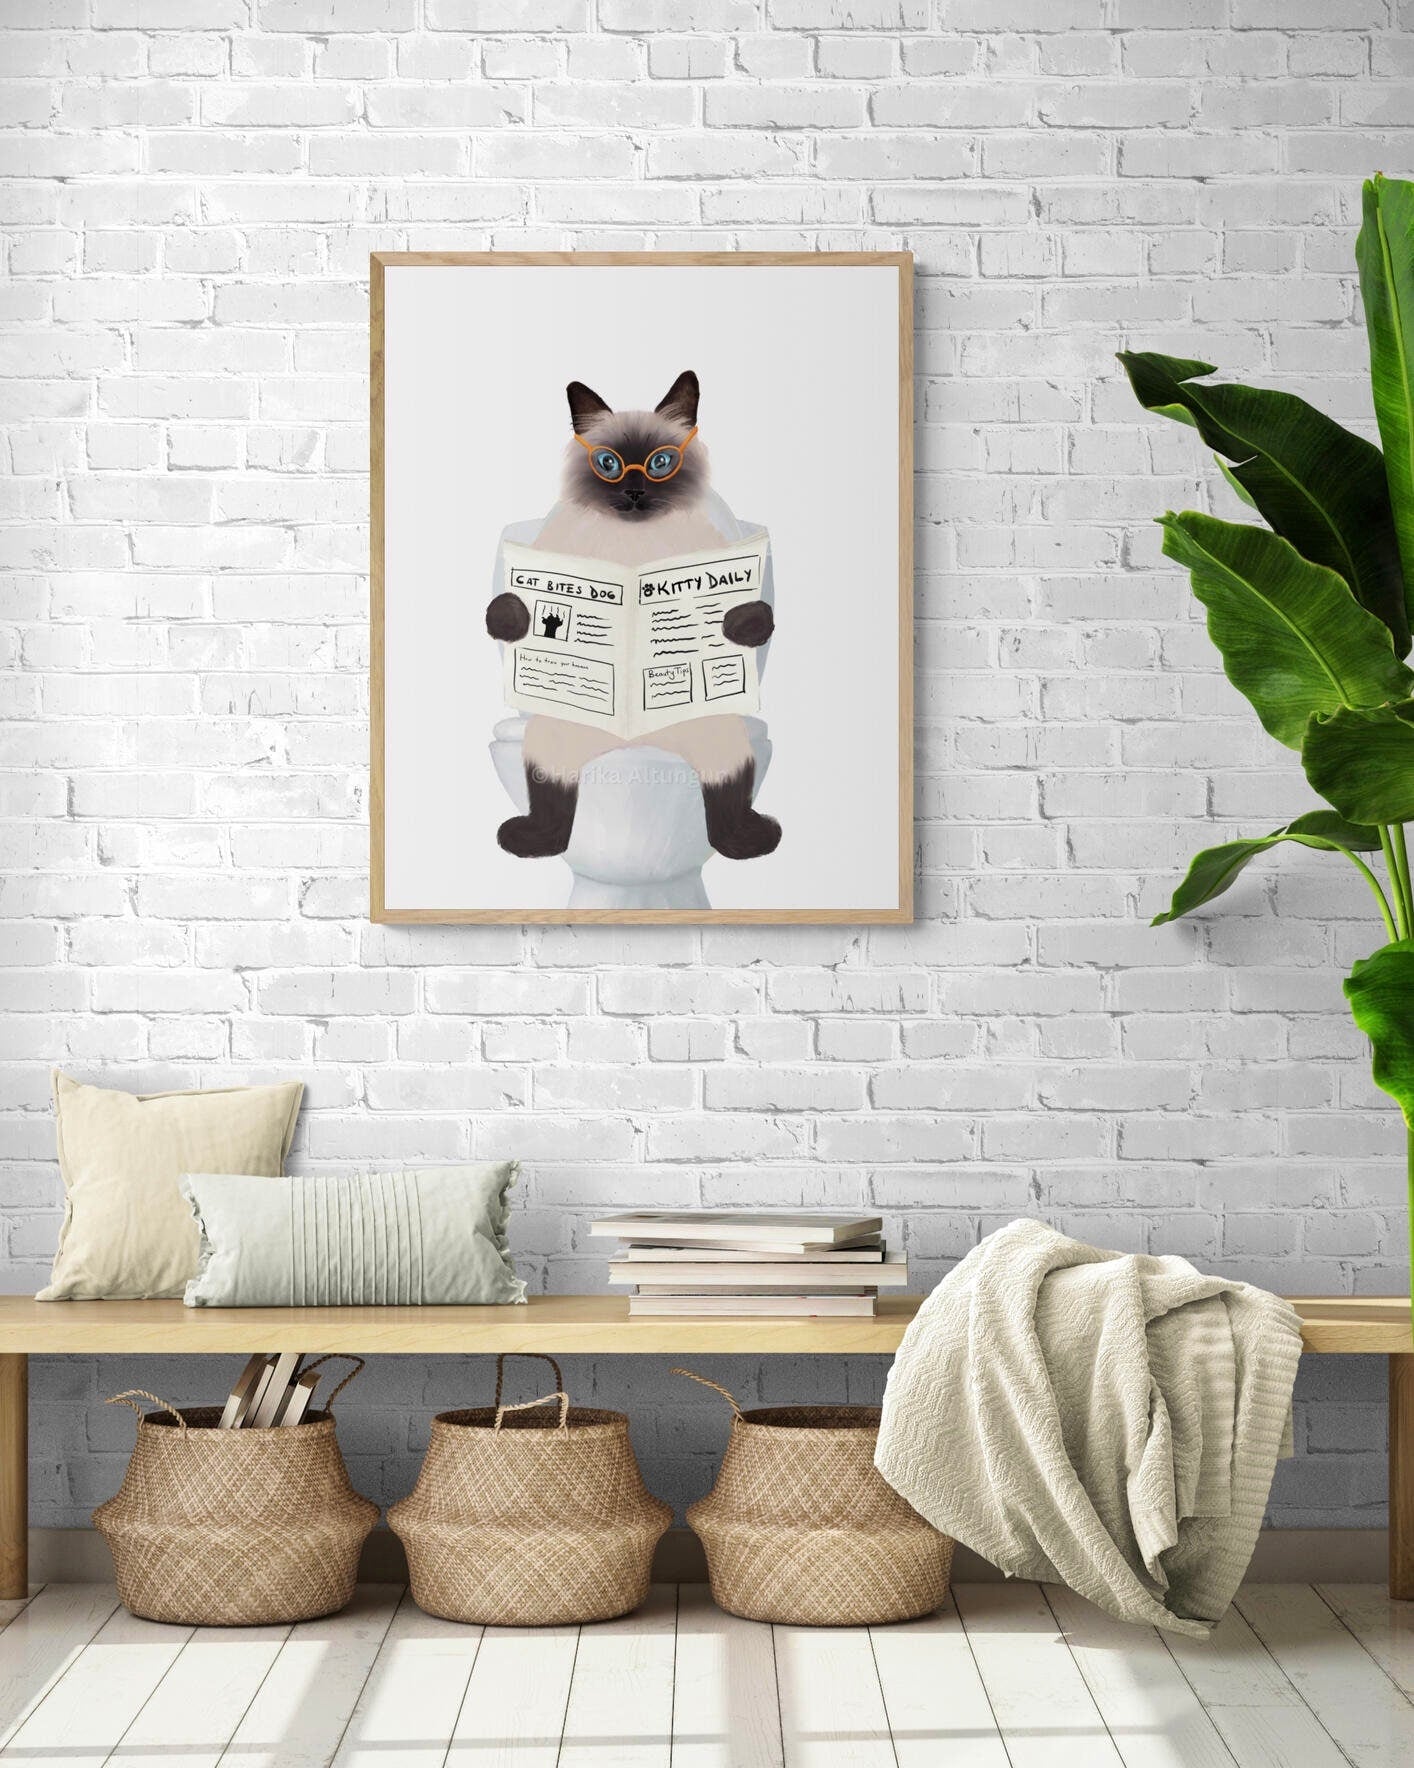 Himalayan Cat On Toilet Print ,Funny Bathroom Decor, Bathroom Cat Painting, Unique Cat Artwork, Cat Lover Gift, Cat Mom Gift